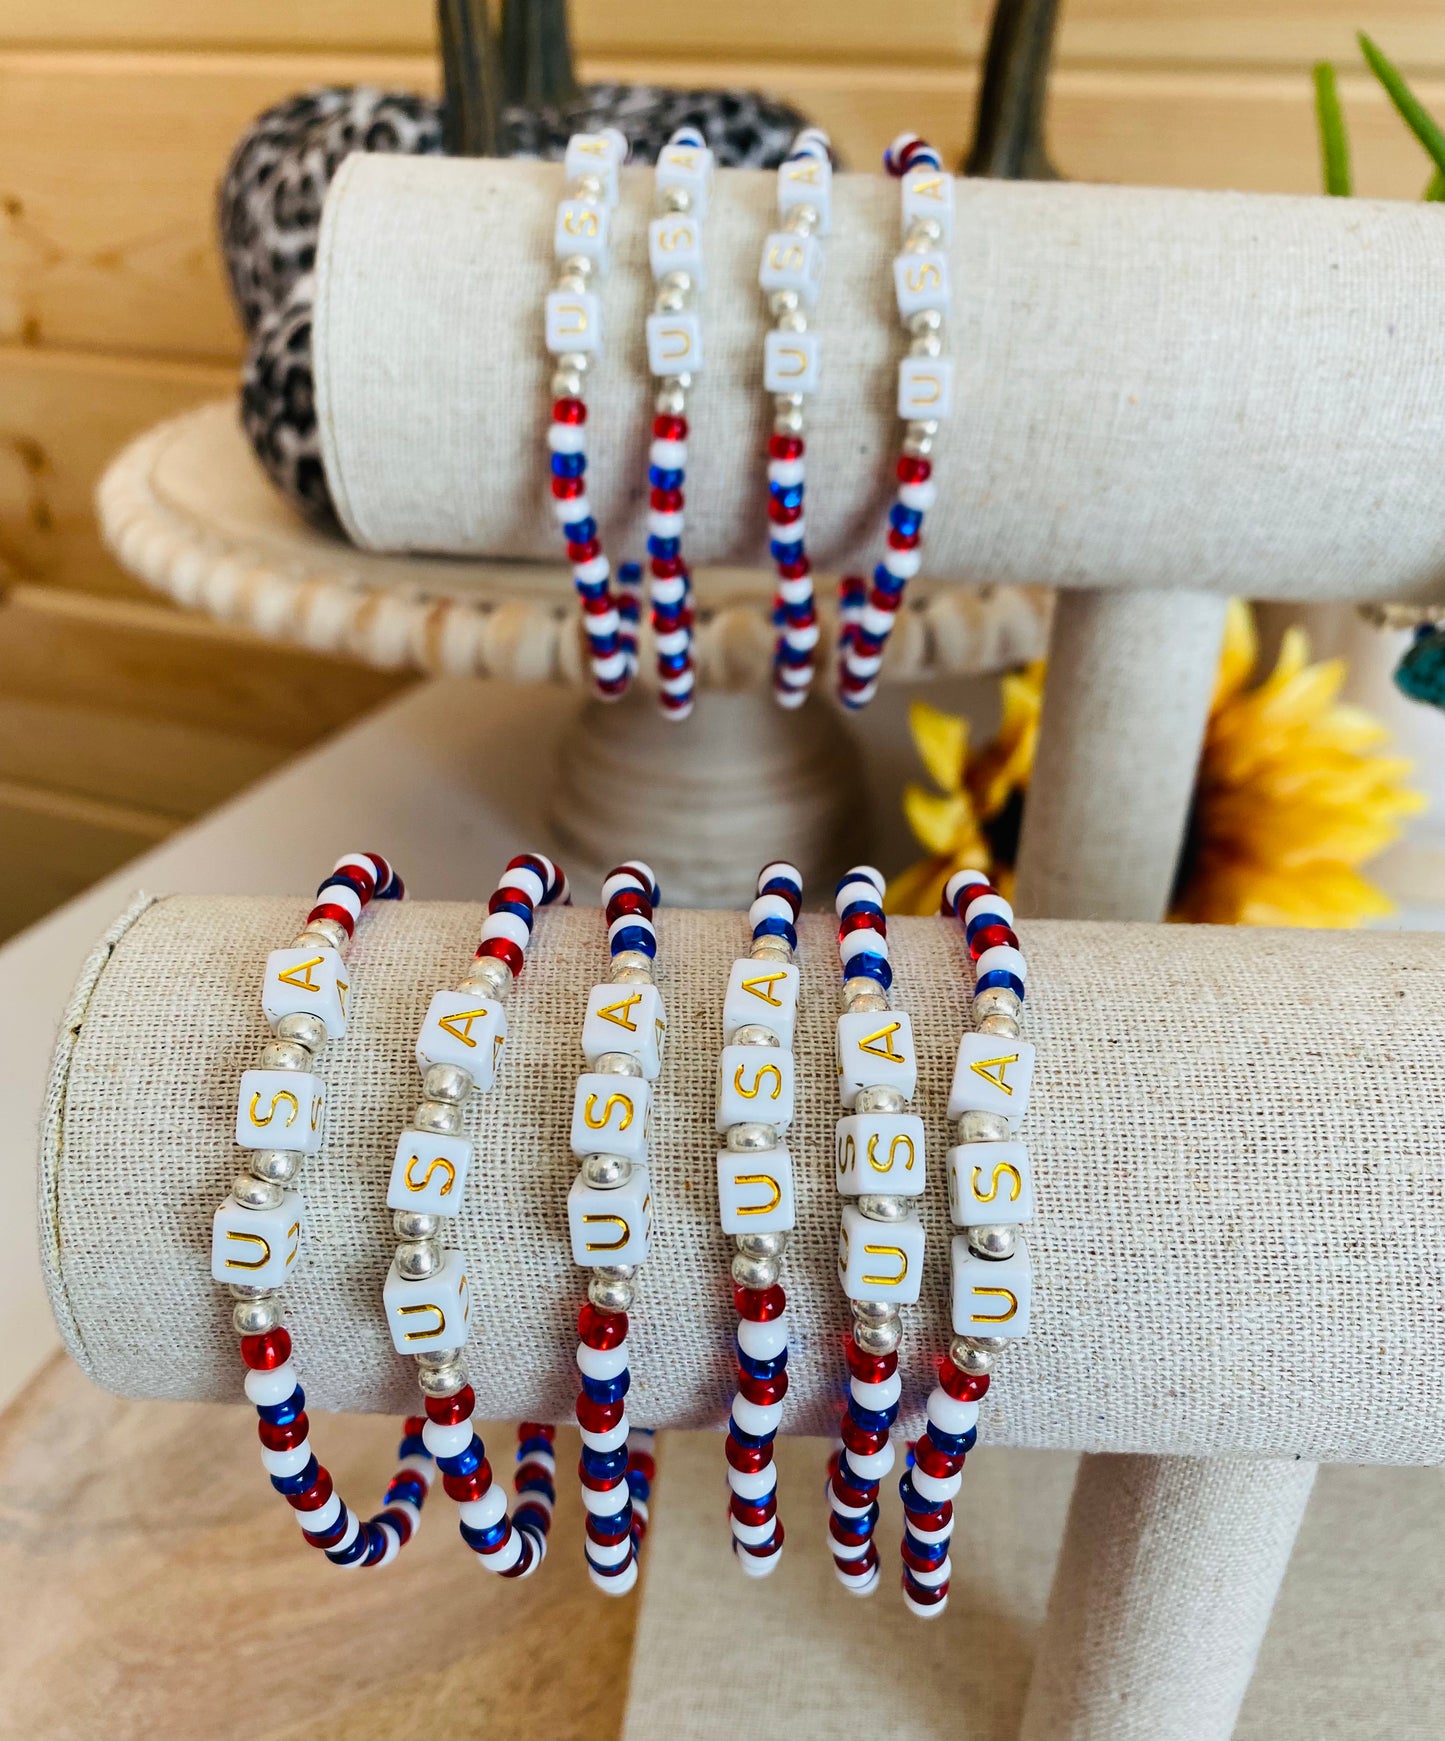 USA Bracelet Red White and Blue Stretchy Handcrafted Bracelet Beaded Americana Glam Patriotic Chic Arm Candy Unisex Jewelry Bracelet Gift